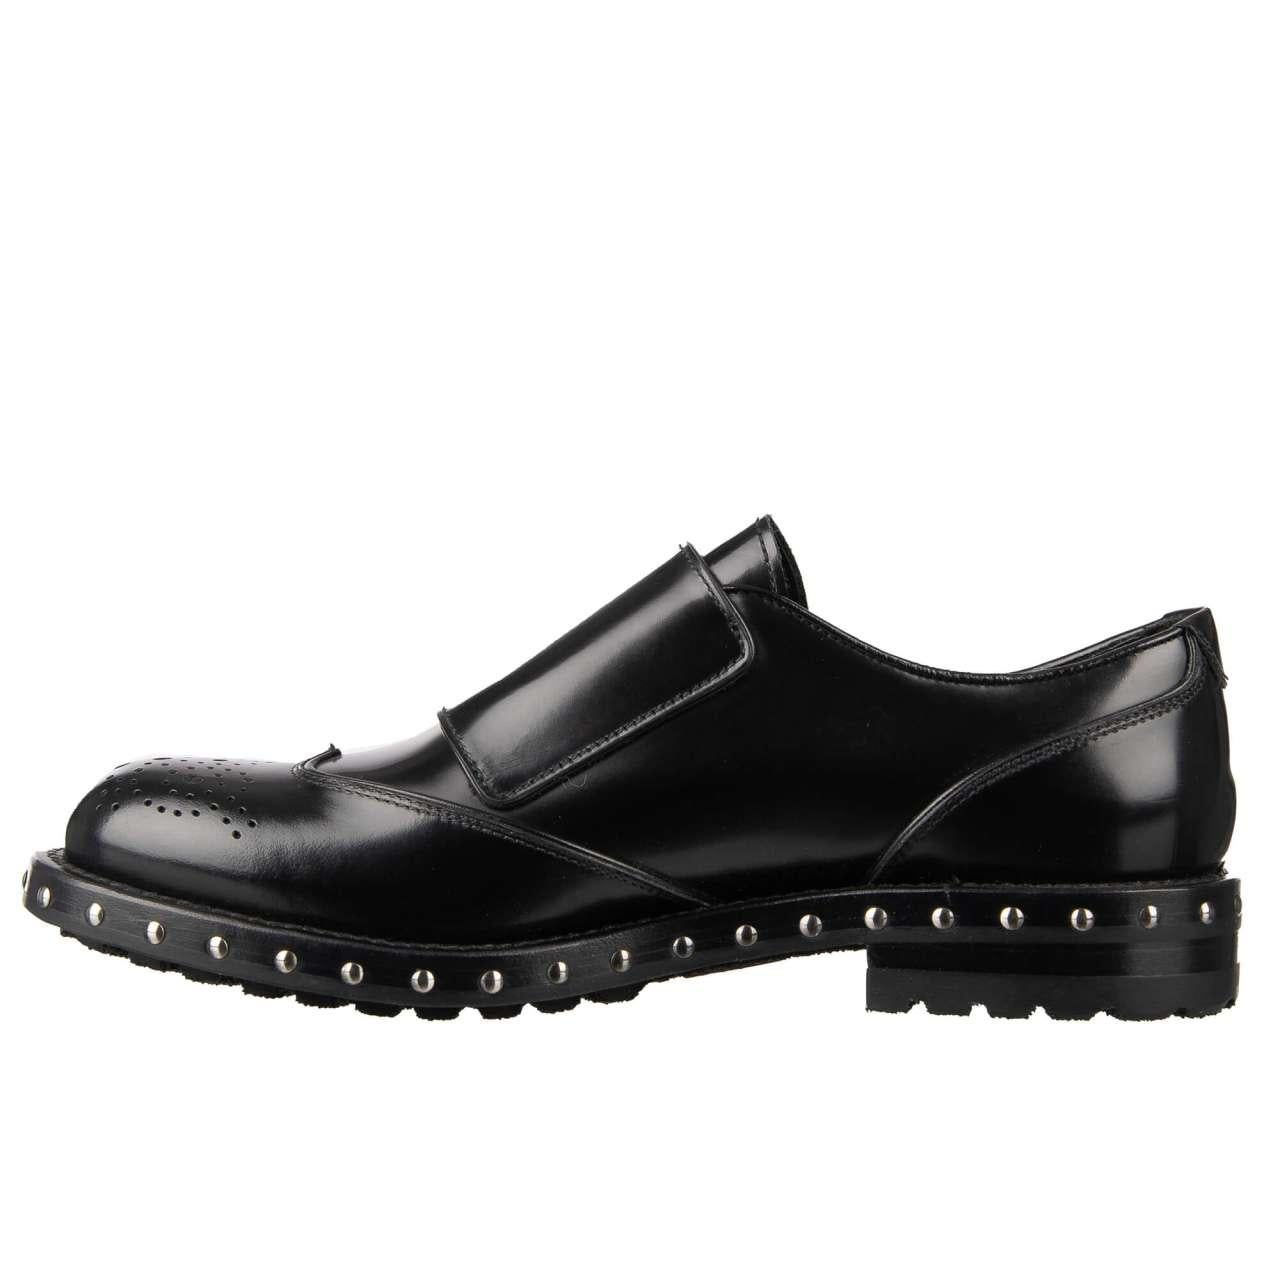 Dolce & Gabbana - Studded Shoes Boots BOY with monk straps Black EUR 40 In Excellent Condition For Sale In Erkrath, DE